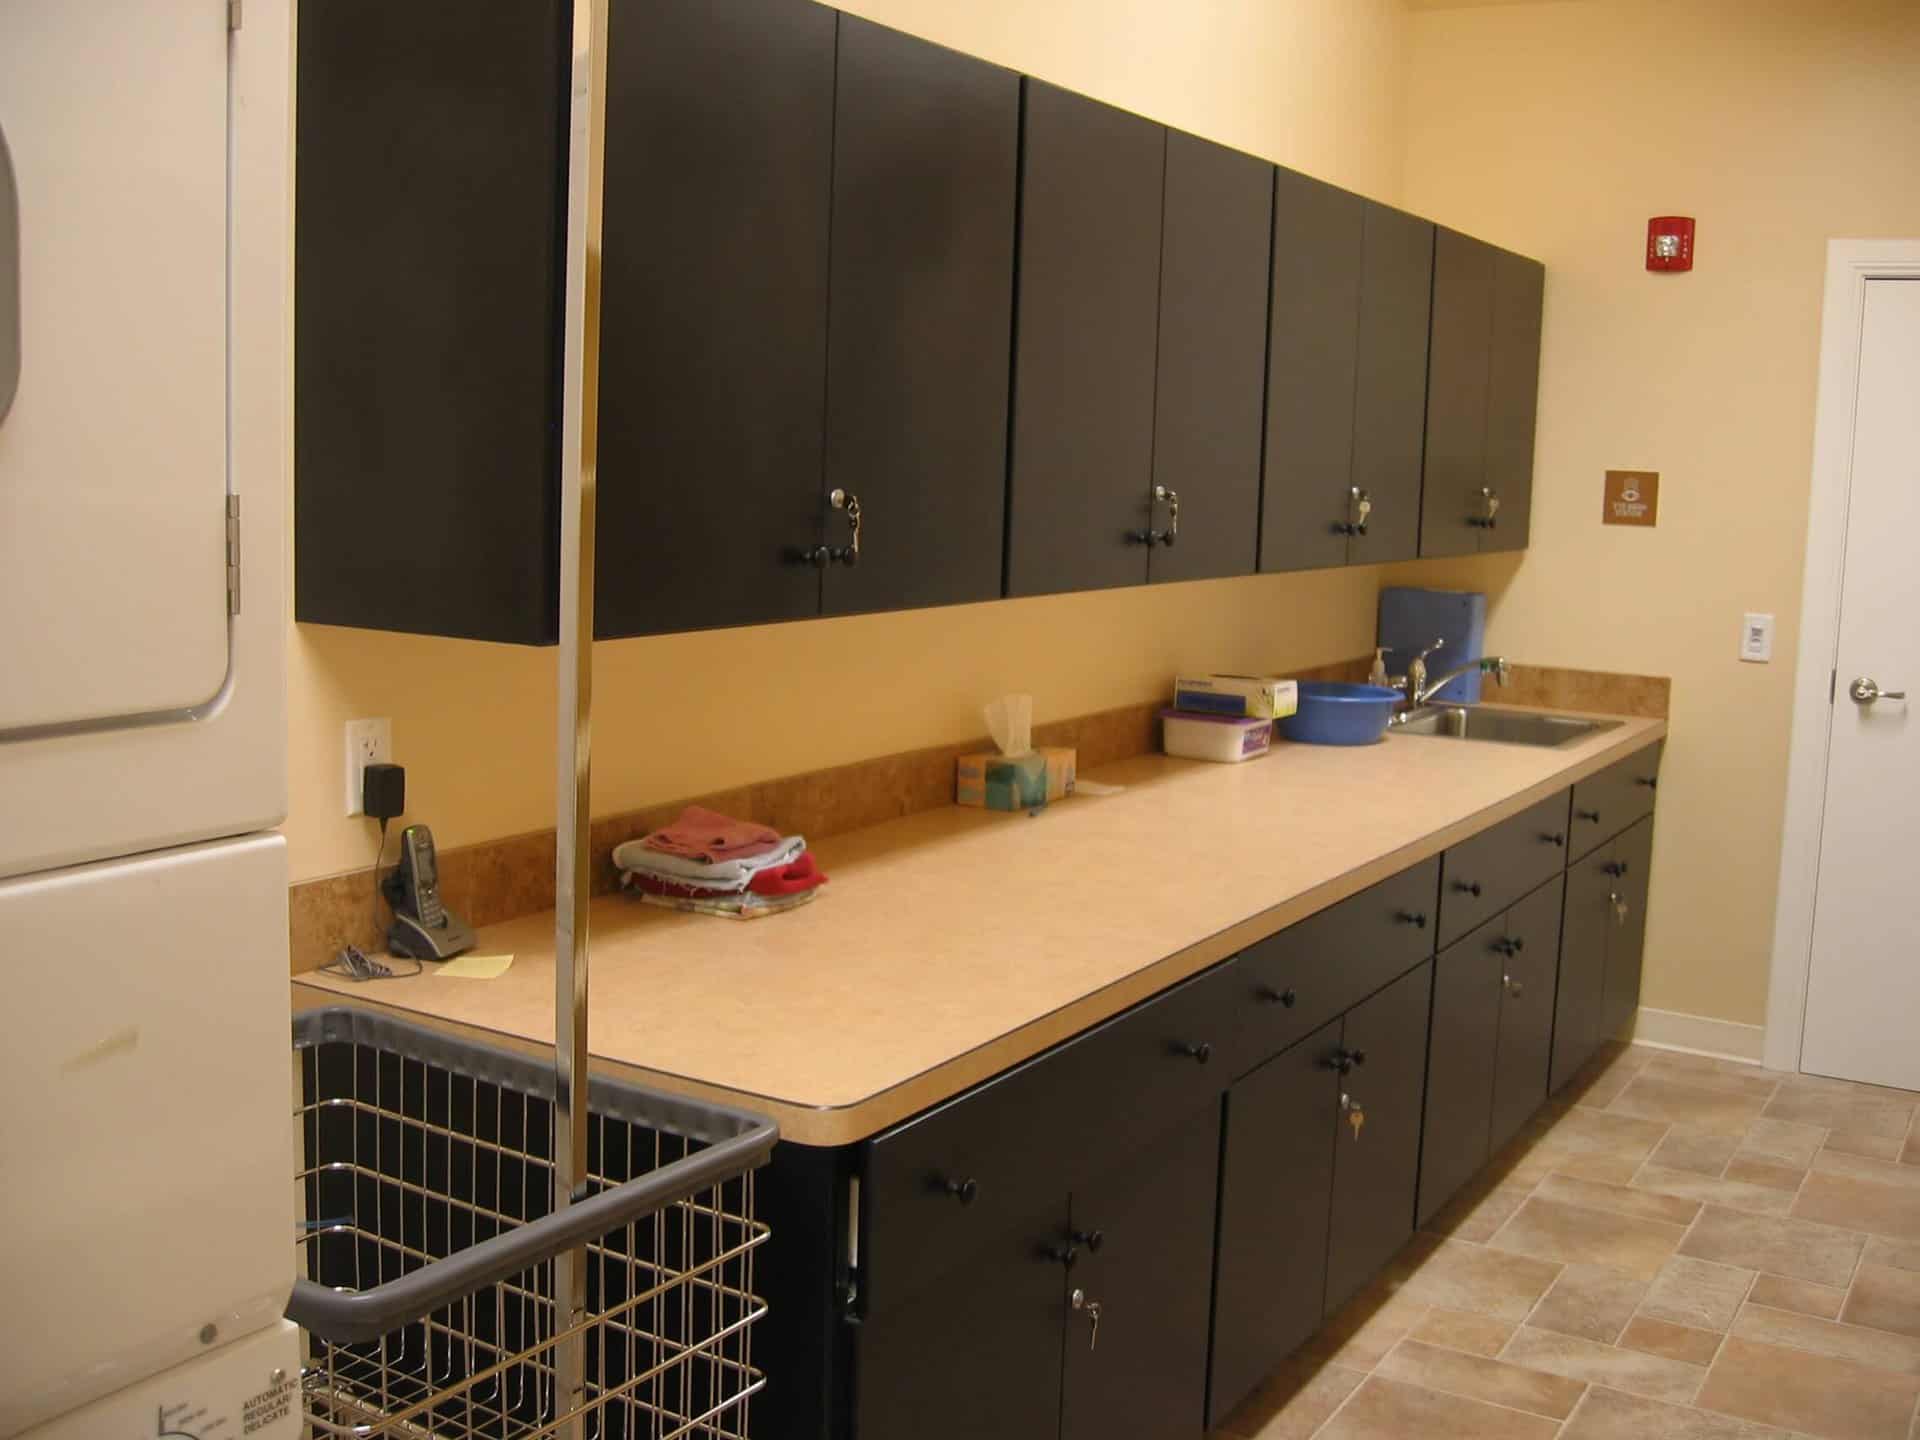 Dark Wooden kitchen cabinet with laminate countertop in an office.